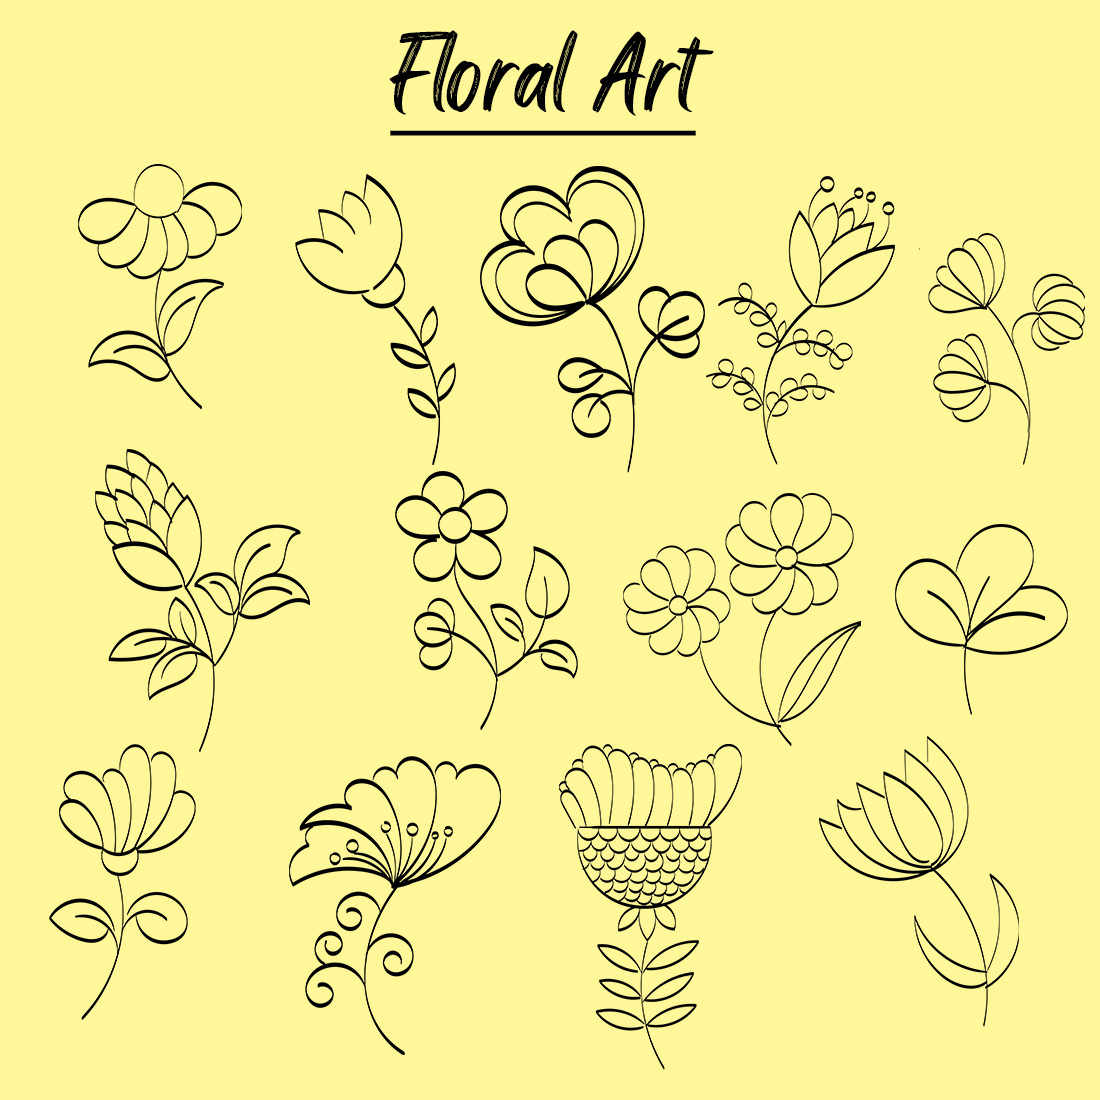 Floral Art Drawing with Line-art cover image.